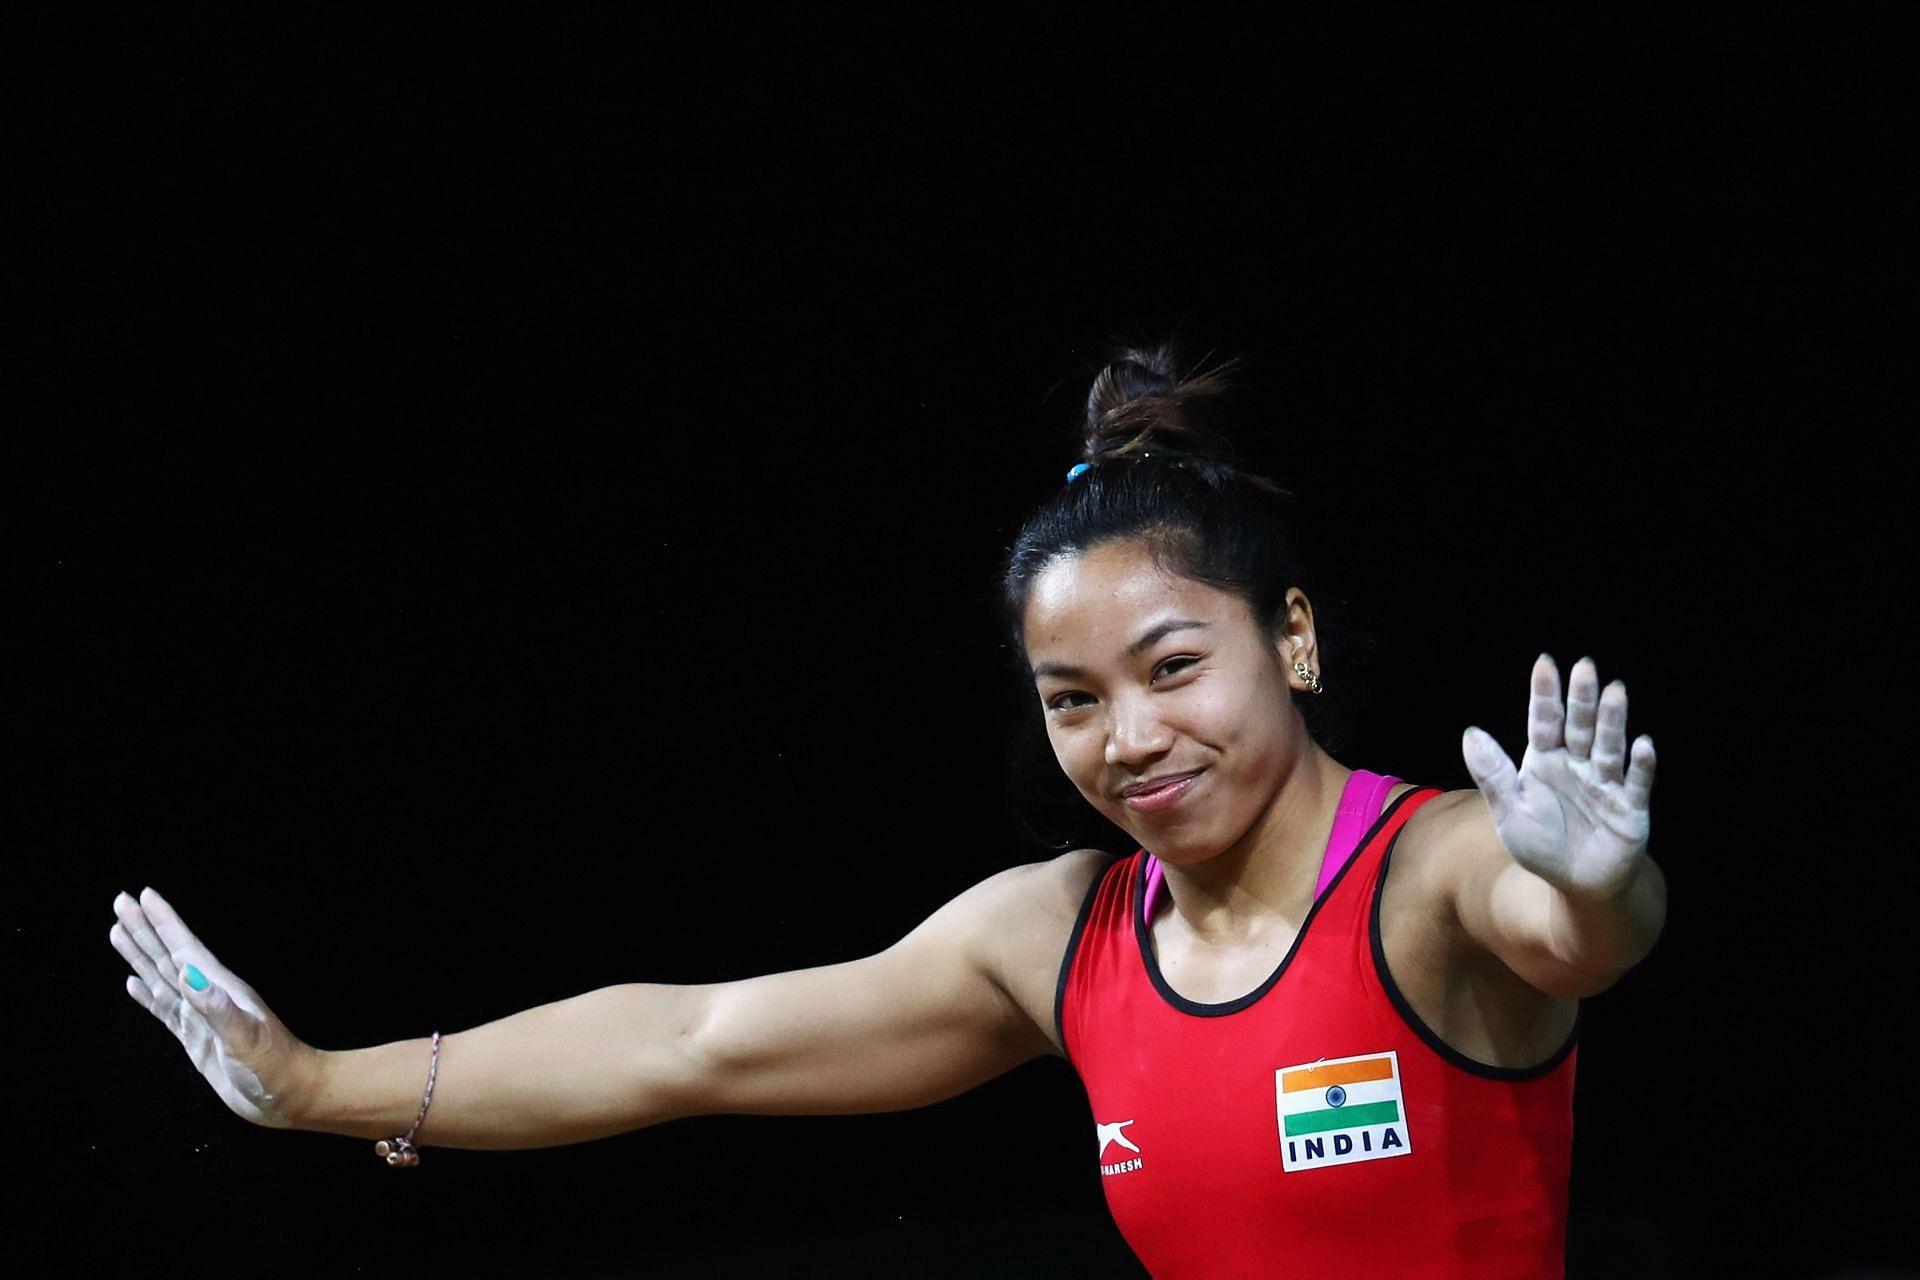 Mirabai Chanu will take part in the Singapore Weightlifting International. (PC: Getty Images)